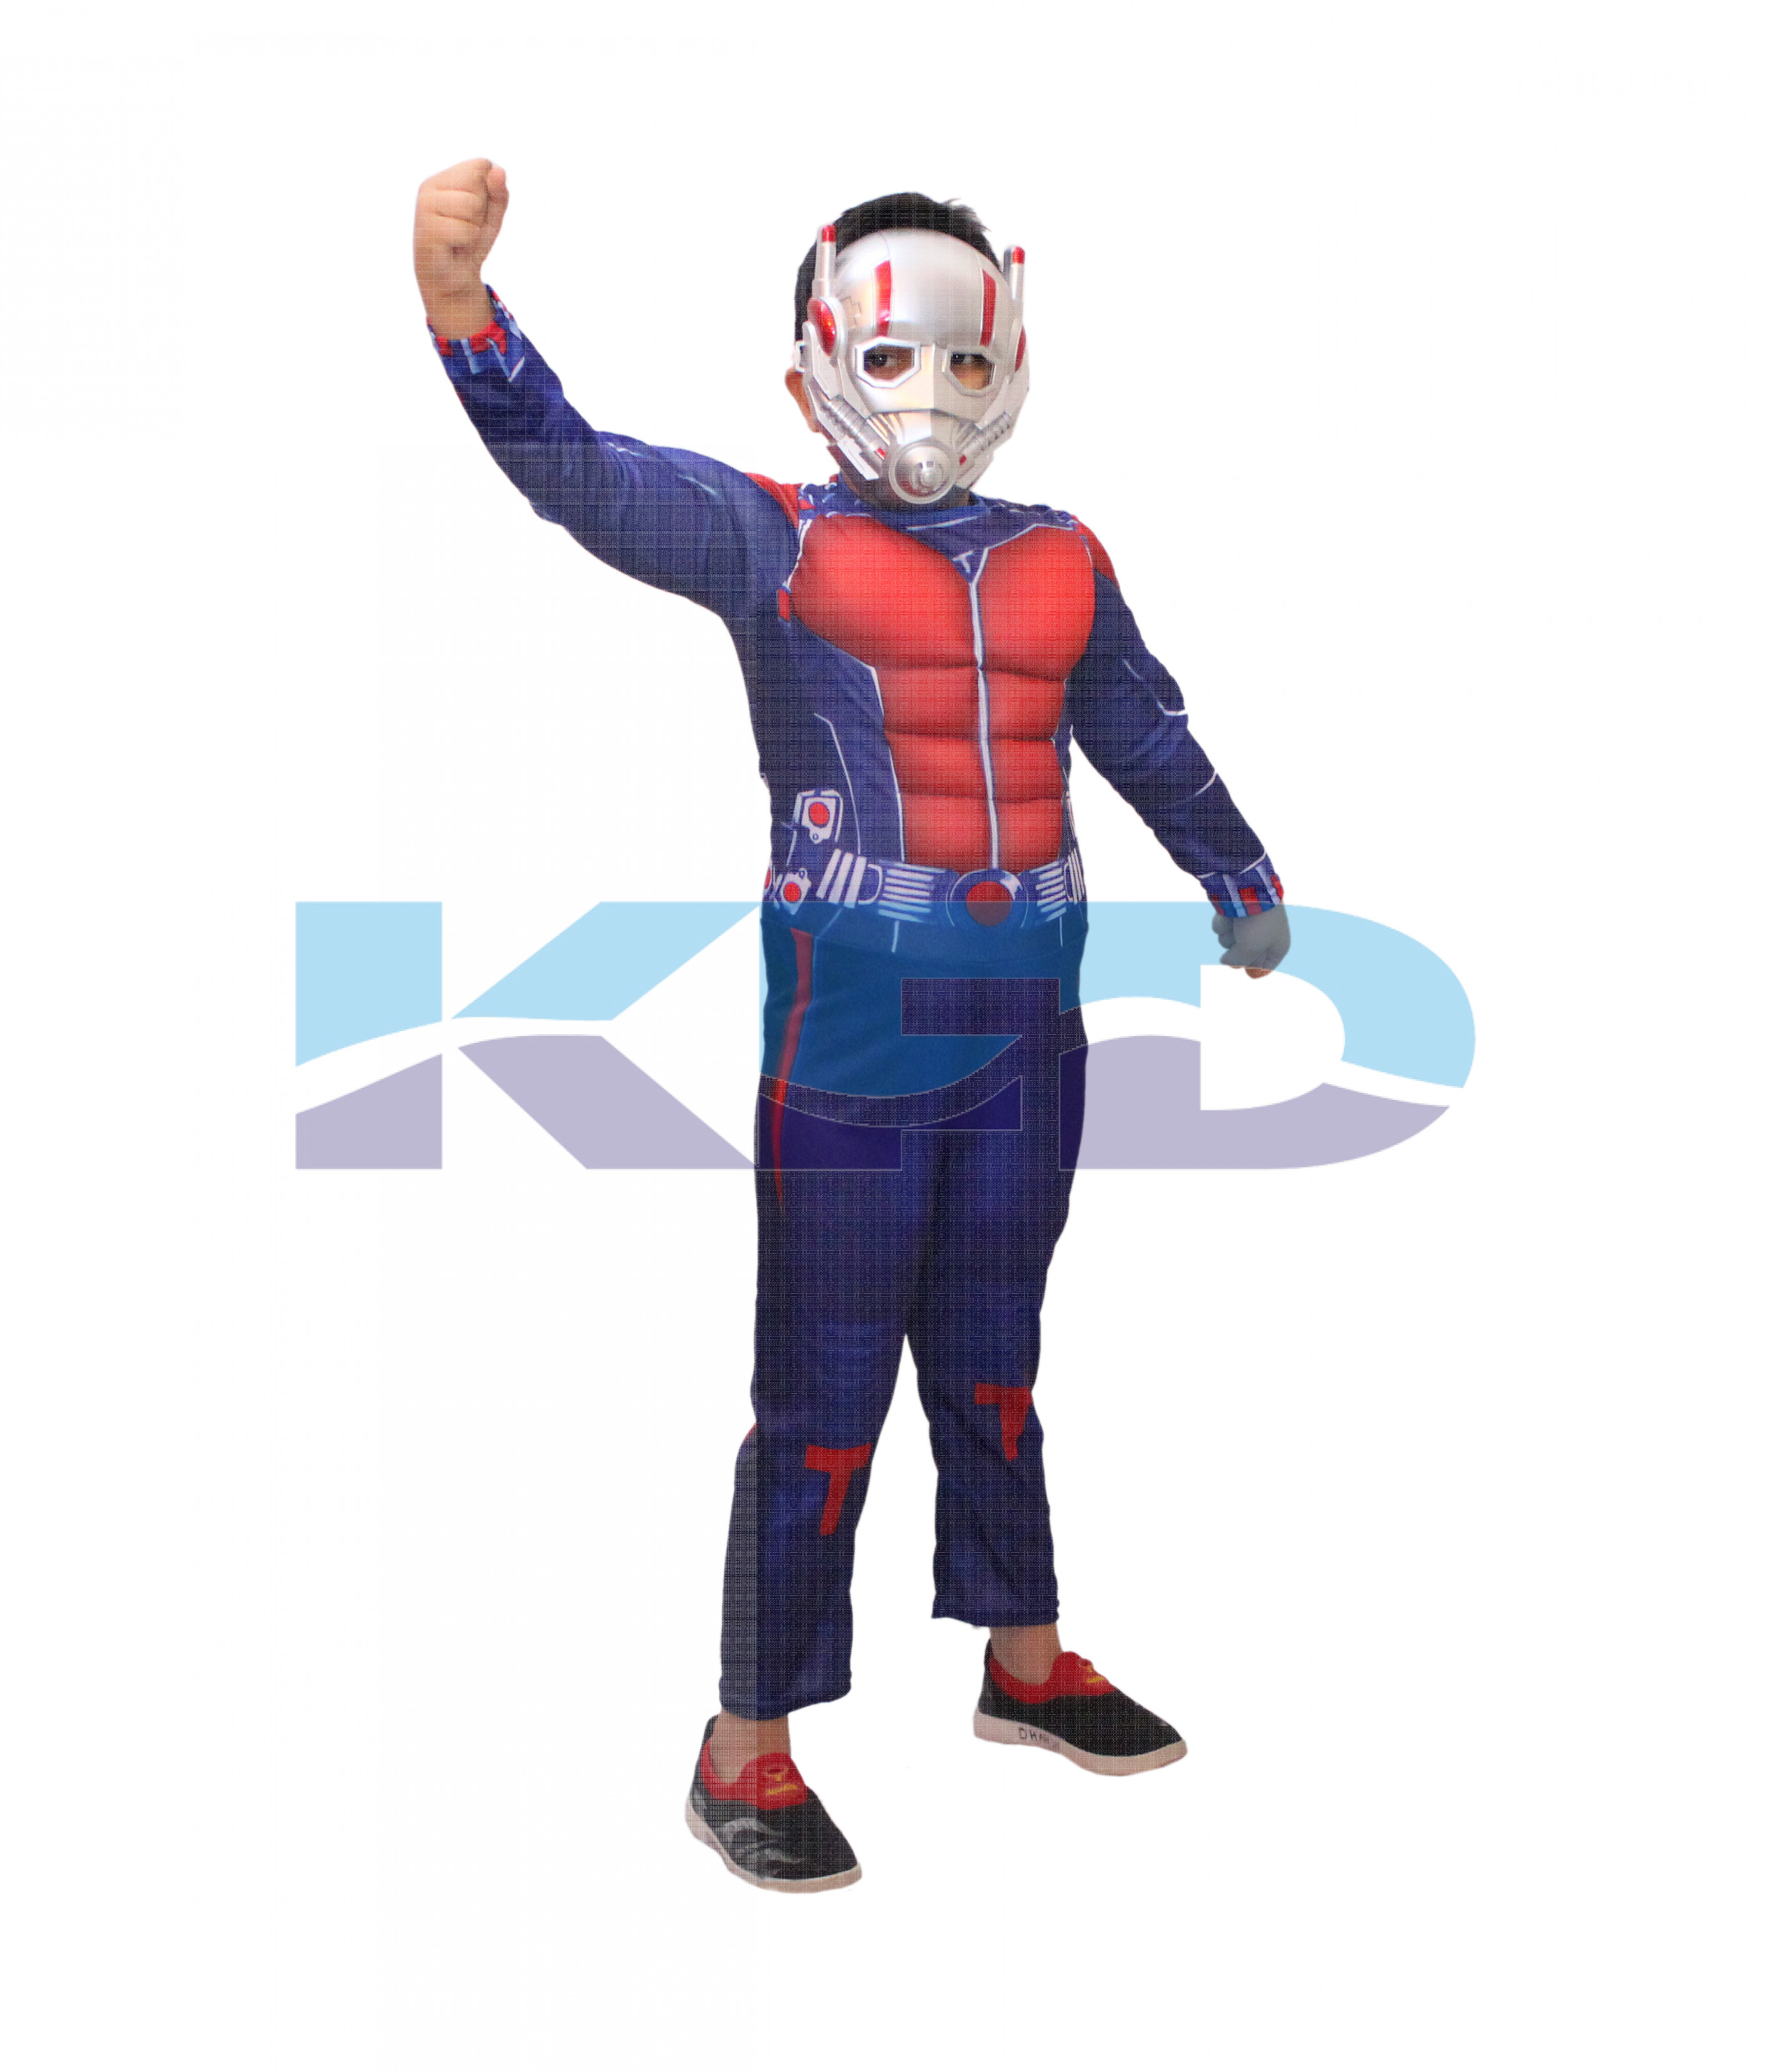 Antman fancy dress for kids,Cartoon/superhero Costume for School Annual function/Theme Party/Competition/Stage Shows Dress